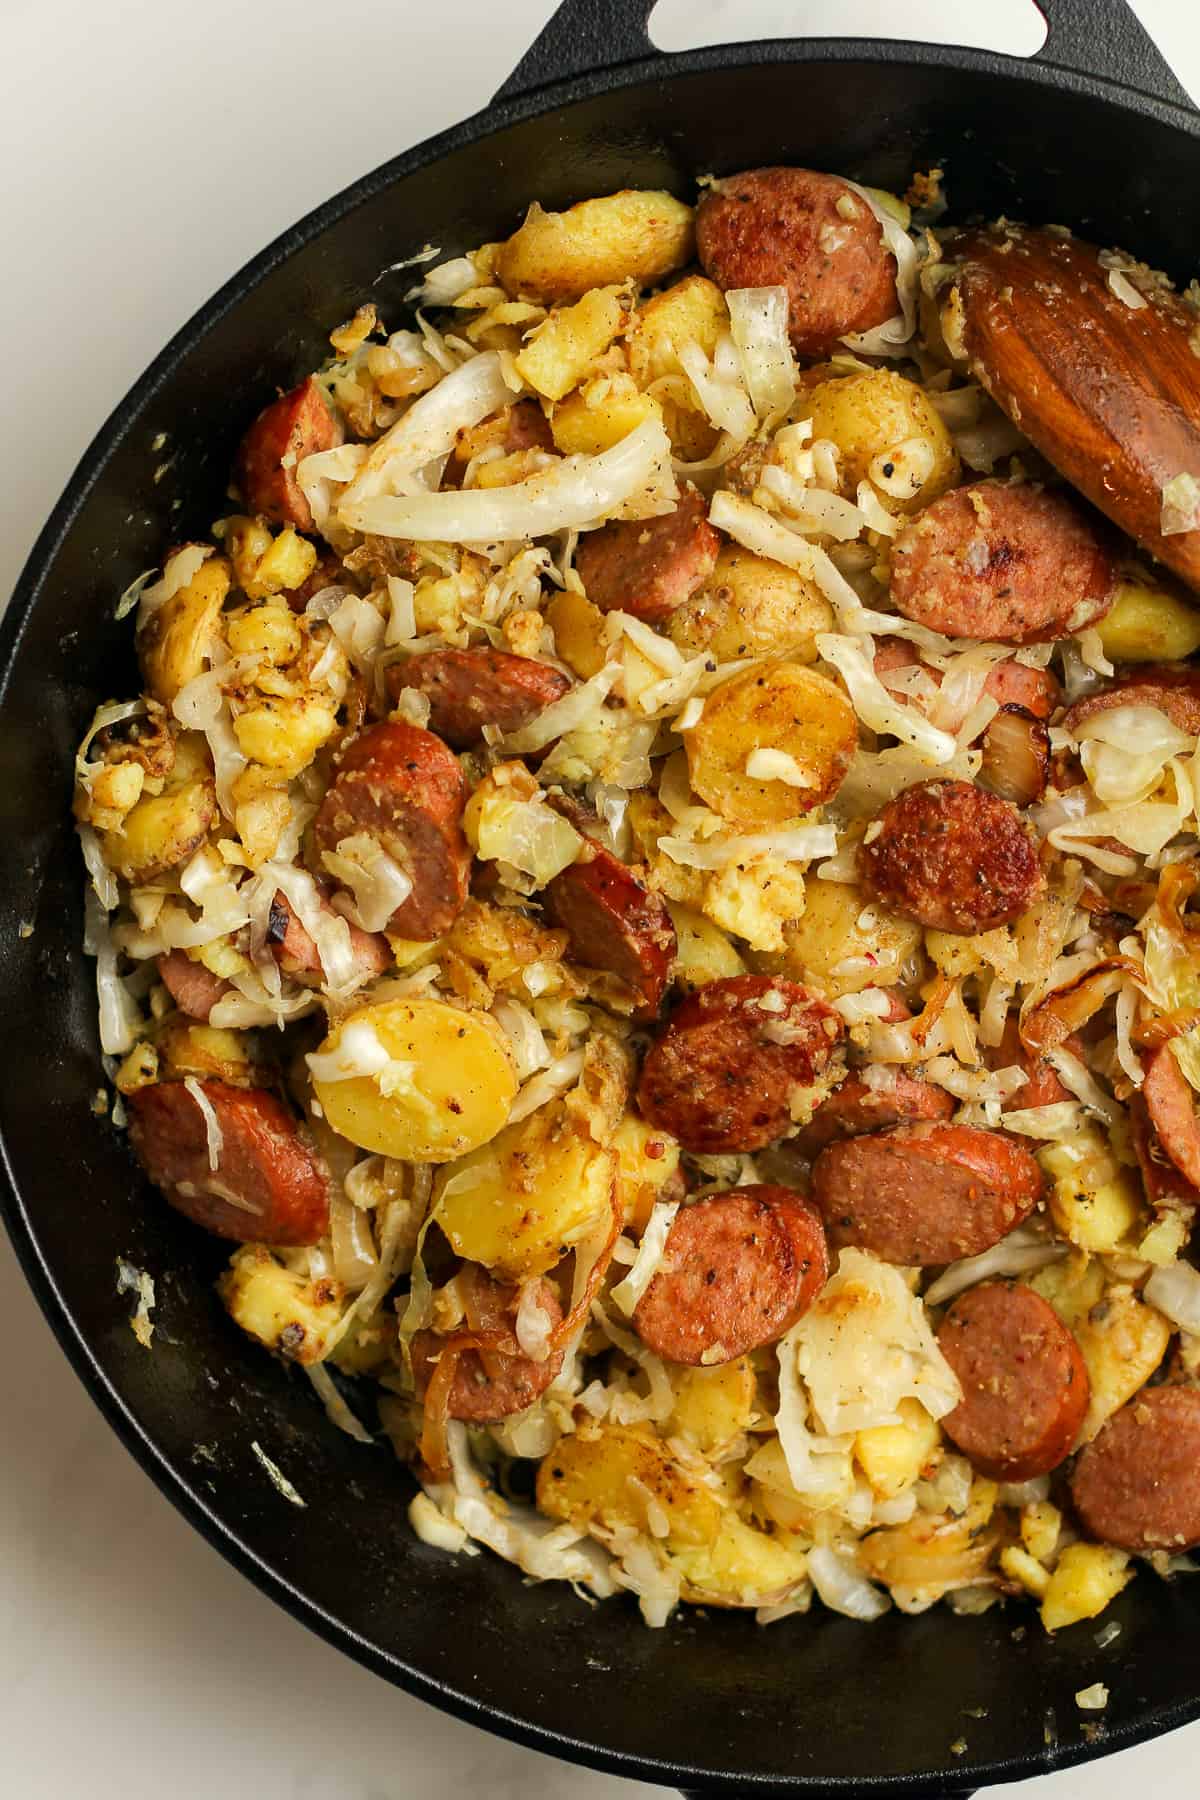 Closeup on the finished skillet of sauerkraut and sausage.